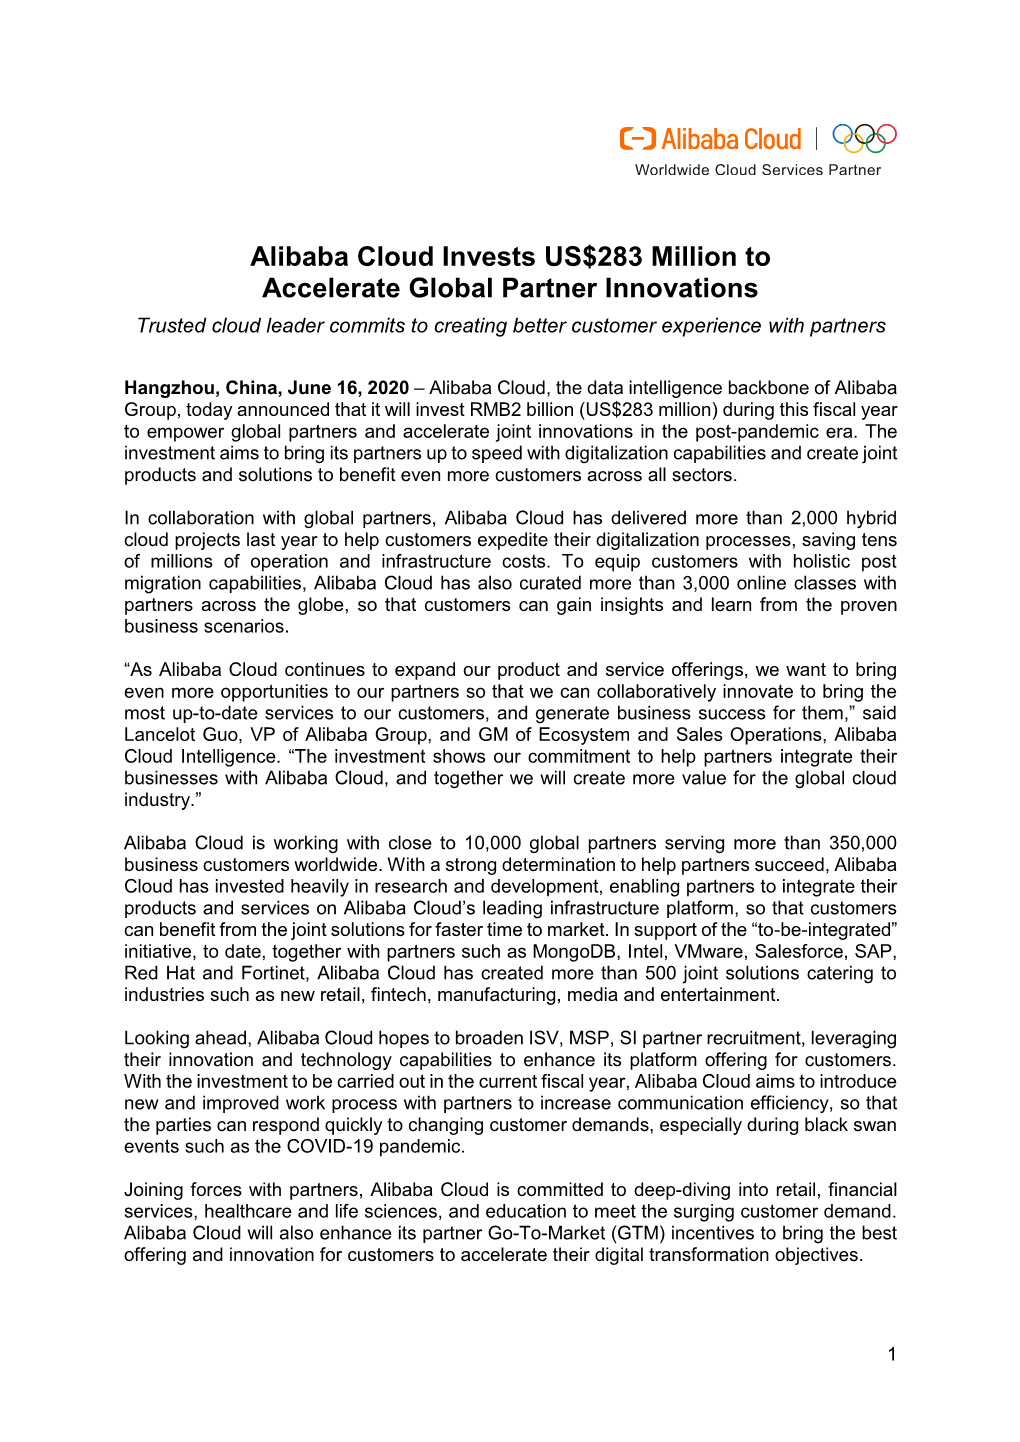 Alibaba Cloud Invests US$283 Million to Accelerate Global Partner Innovations Trusted Cloud Leader Commits to Creating Better Customer Experience with Partners